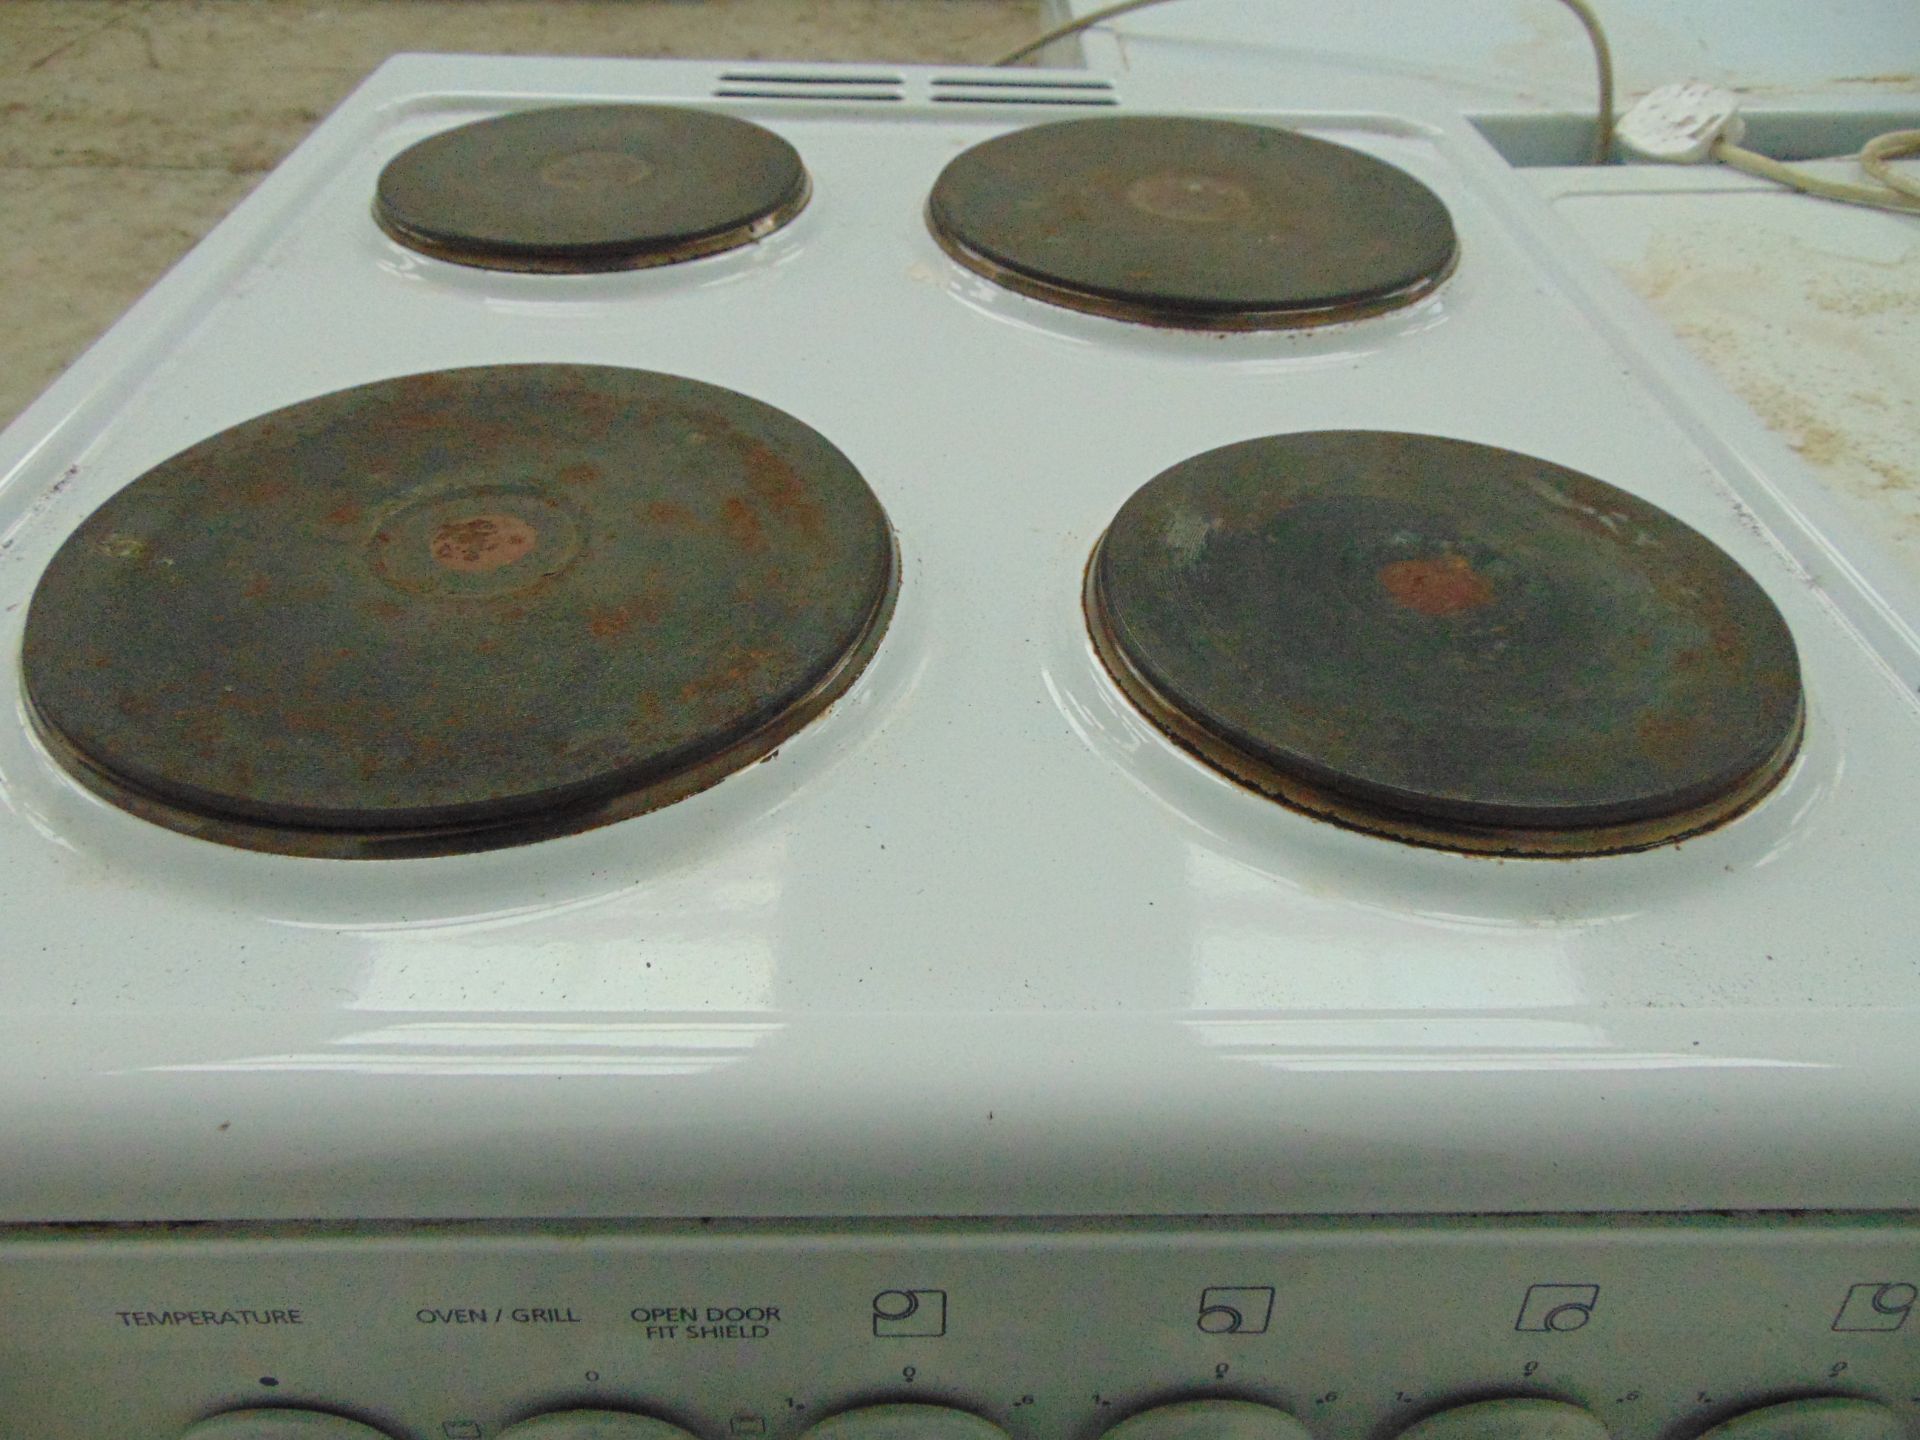 Beko electric oven and x4 hob cooker 240v - Image 4 of 4